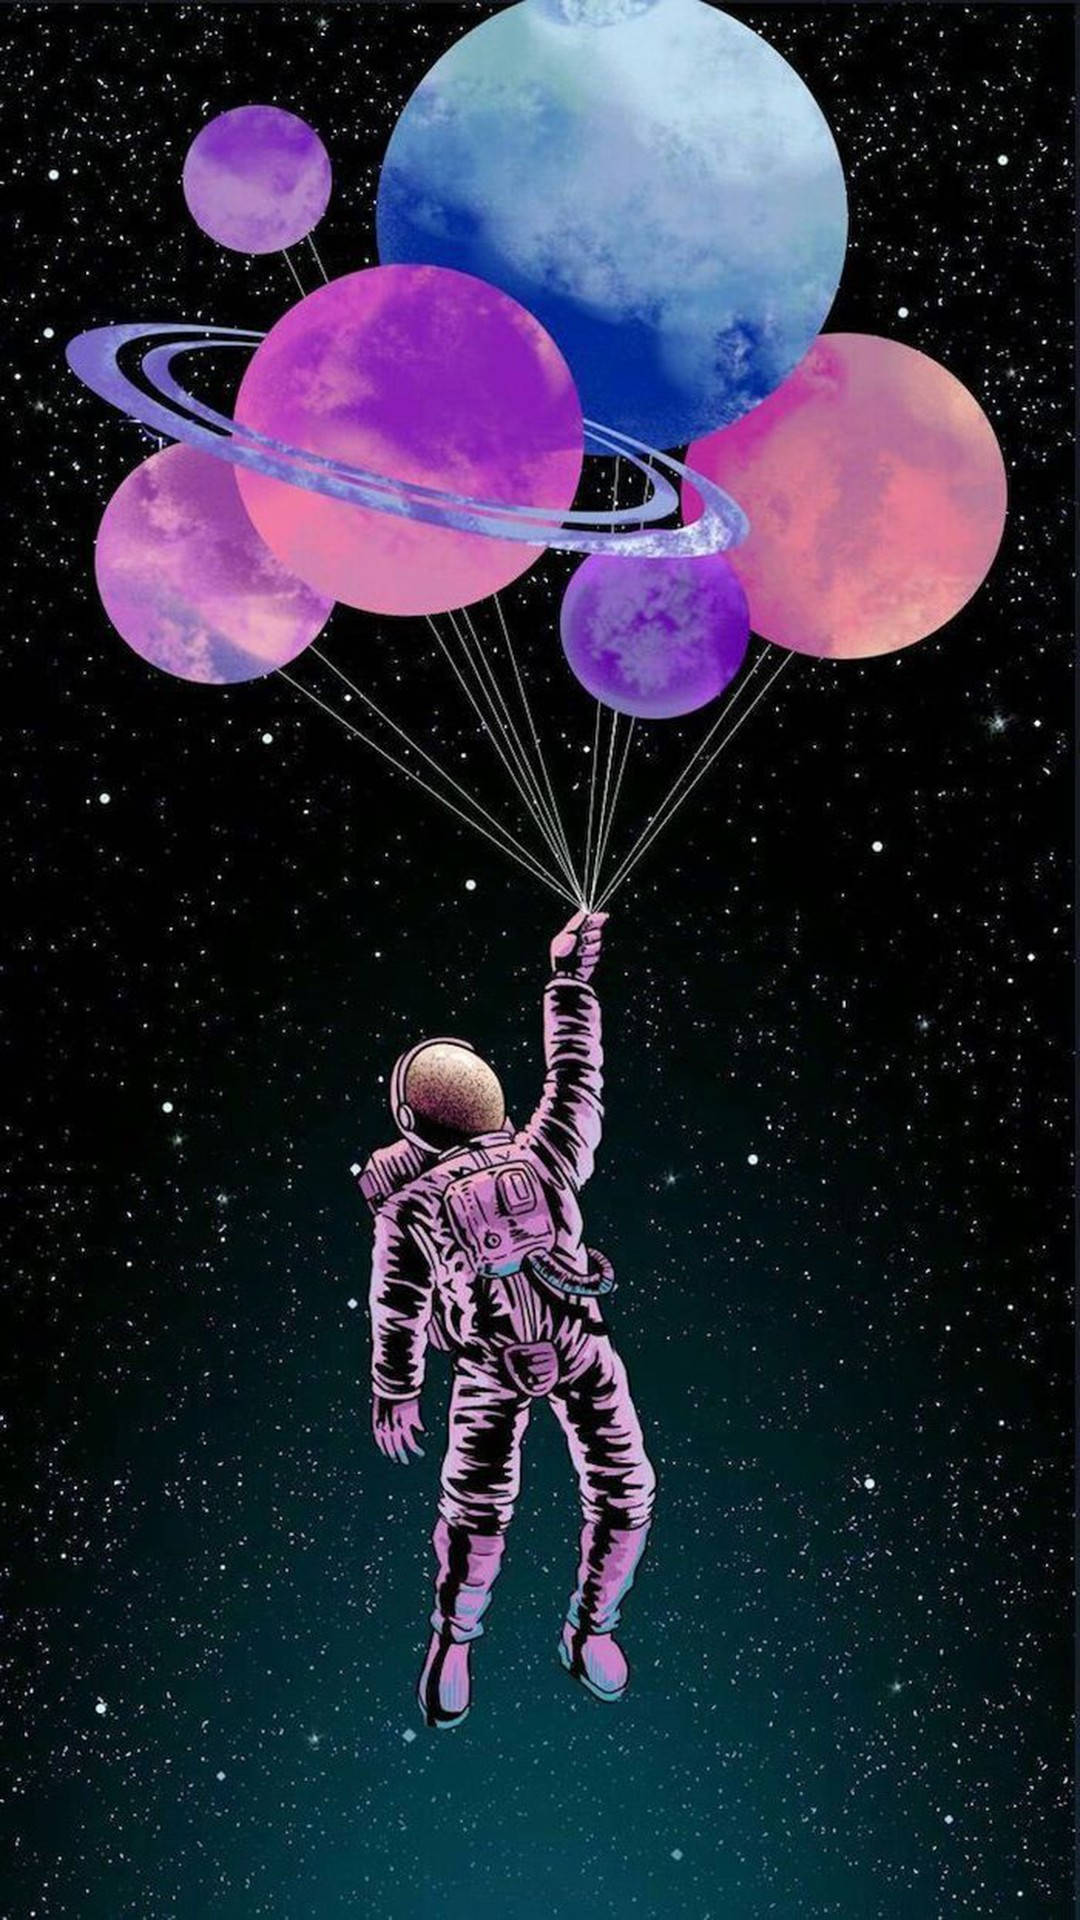 Download Iphone 7 Plus Space Astronaut Balloons Wallpaper | Wallpapers.com